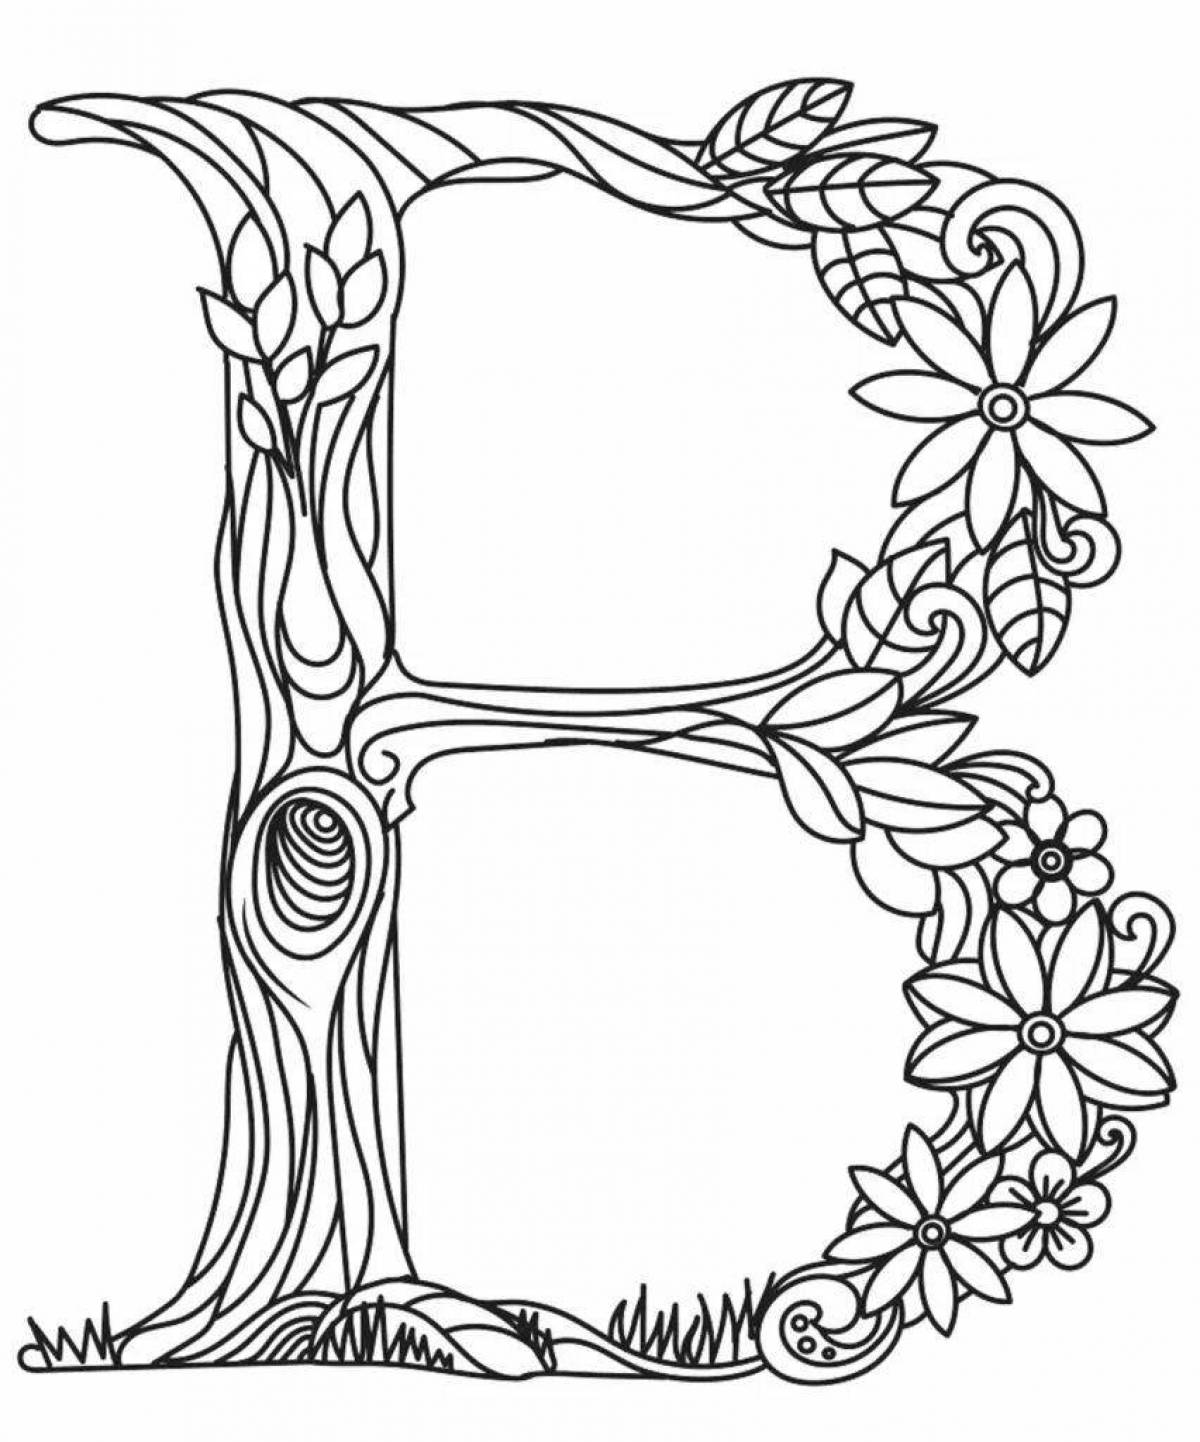 Brilliant letter in lively coloring page